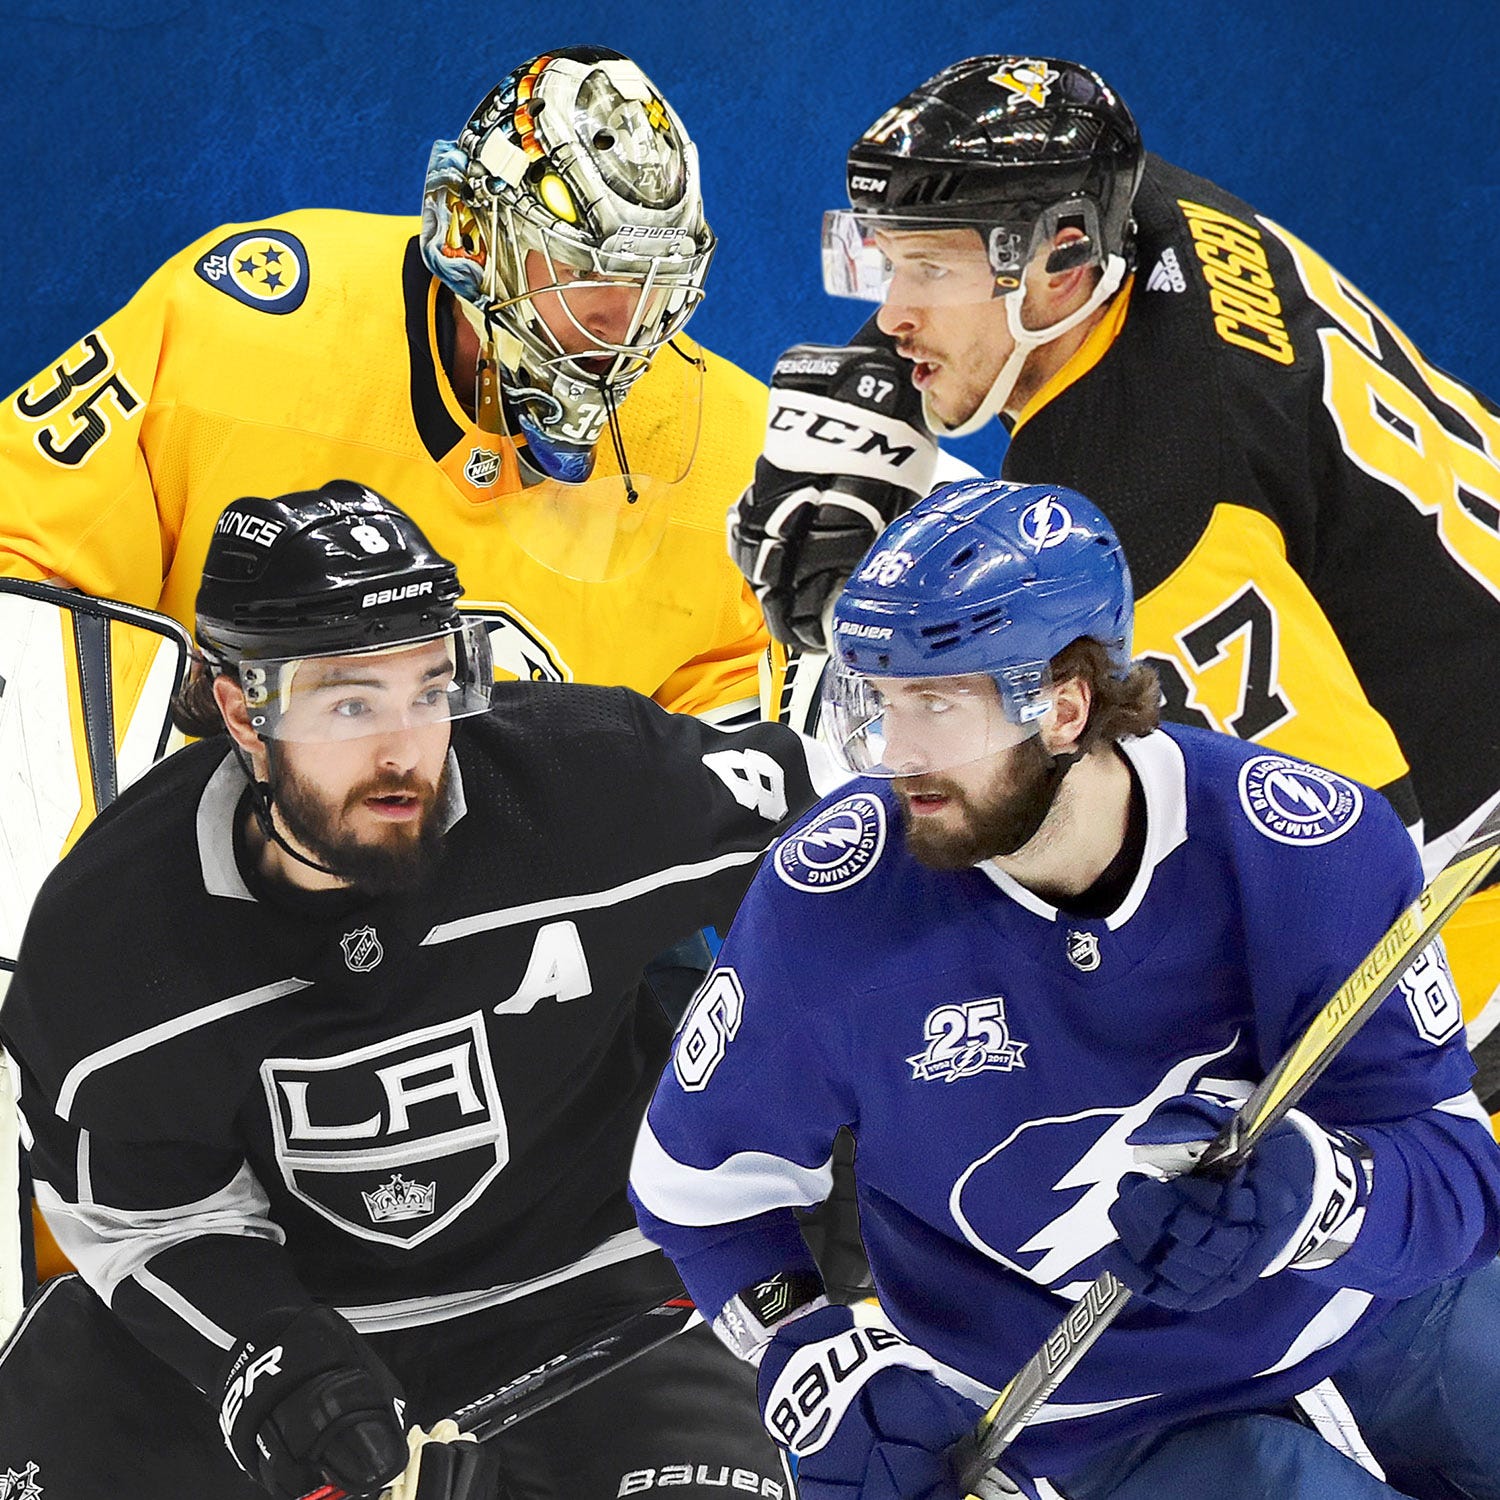 NHL playoffs: Ranking all 16 teams in the field